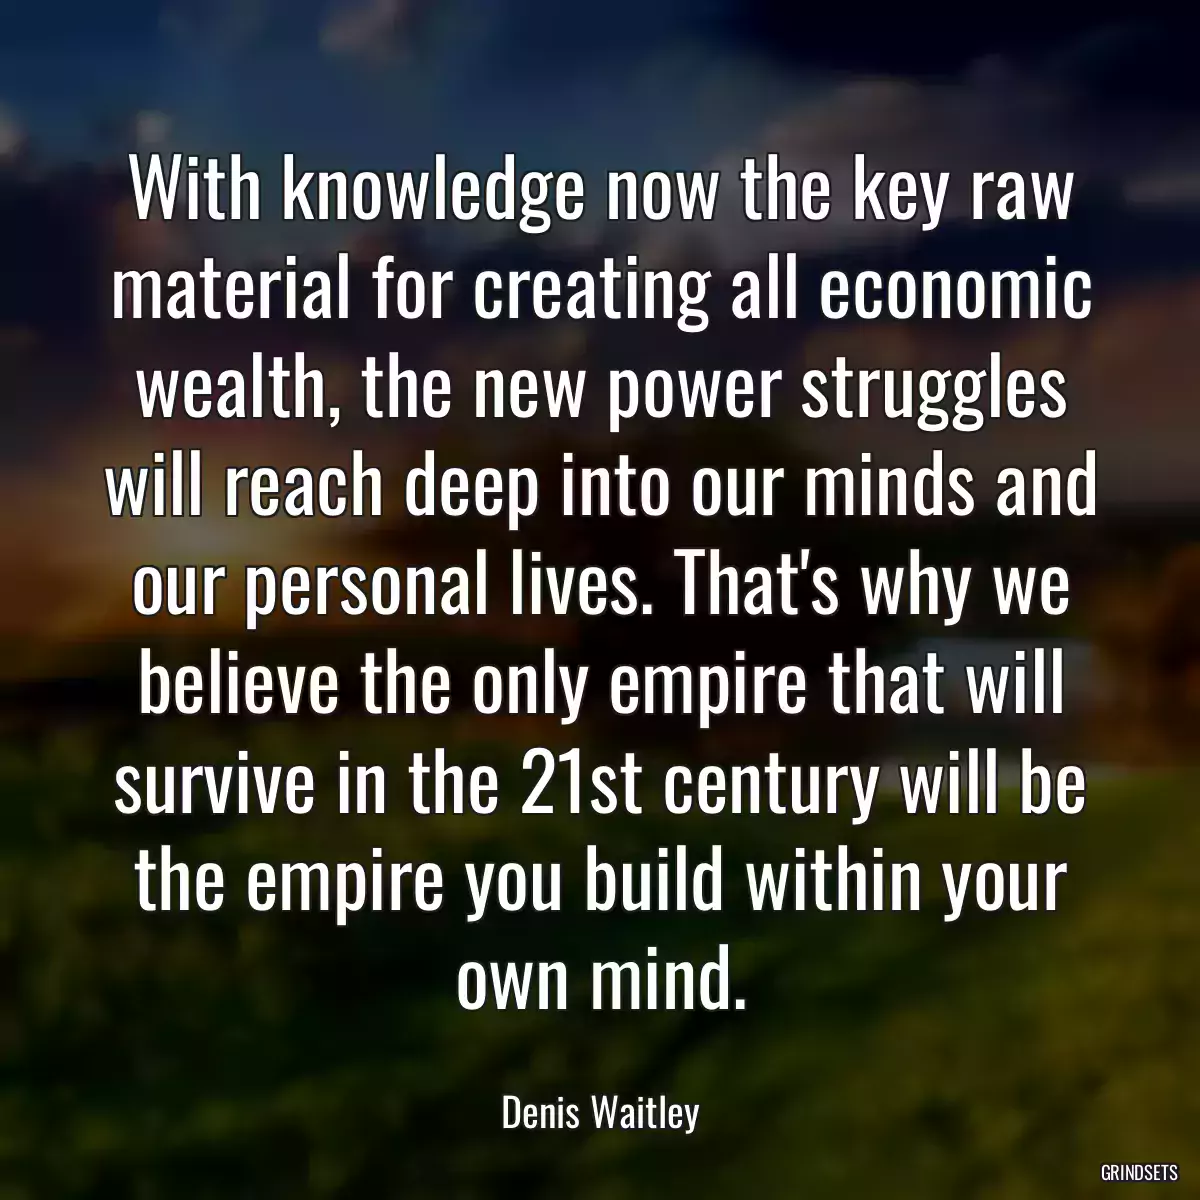 With knowledge now the key raw material for creating all economic wealth, the new power struggles will reach deep into our minds and our personal lives. That\'s why we believe the only empire that will survive in the 21st century will be the empire you build within your own mind.